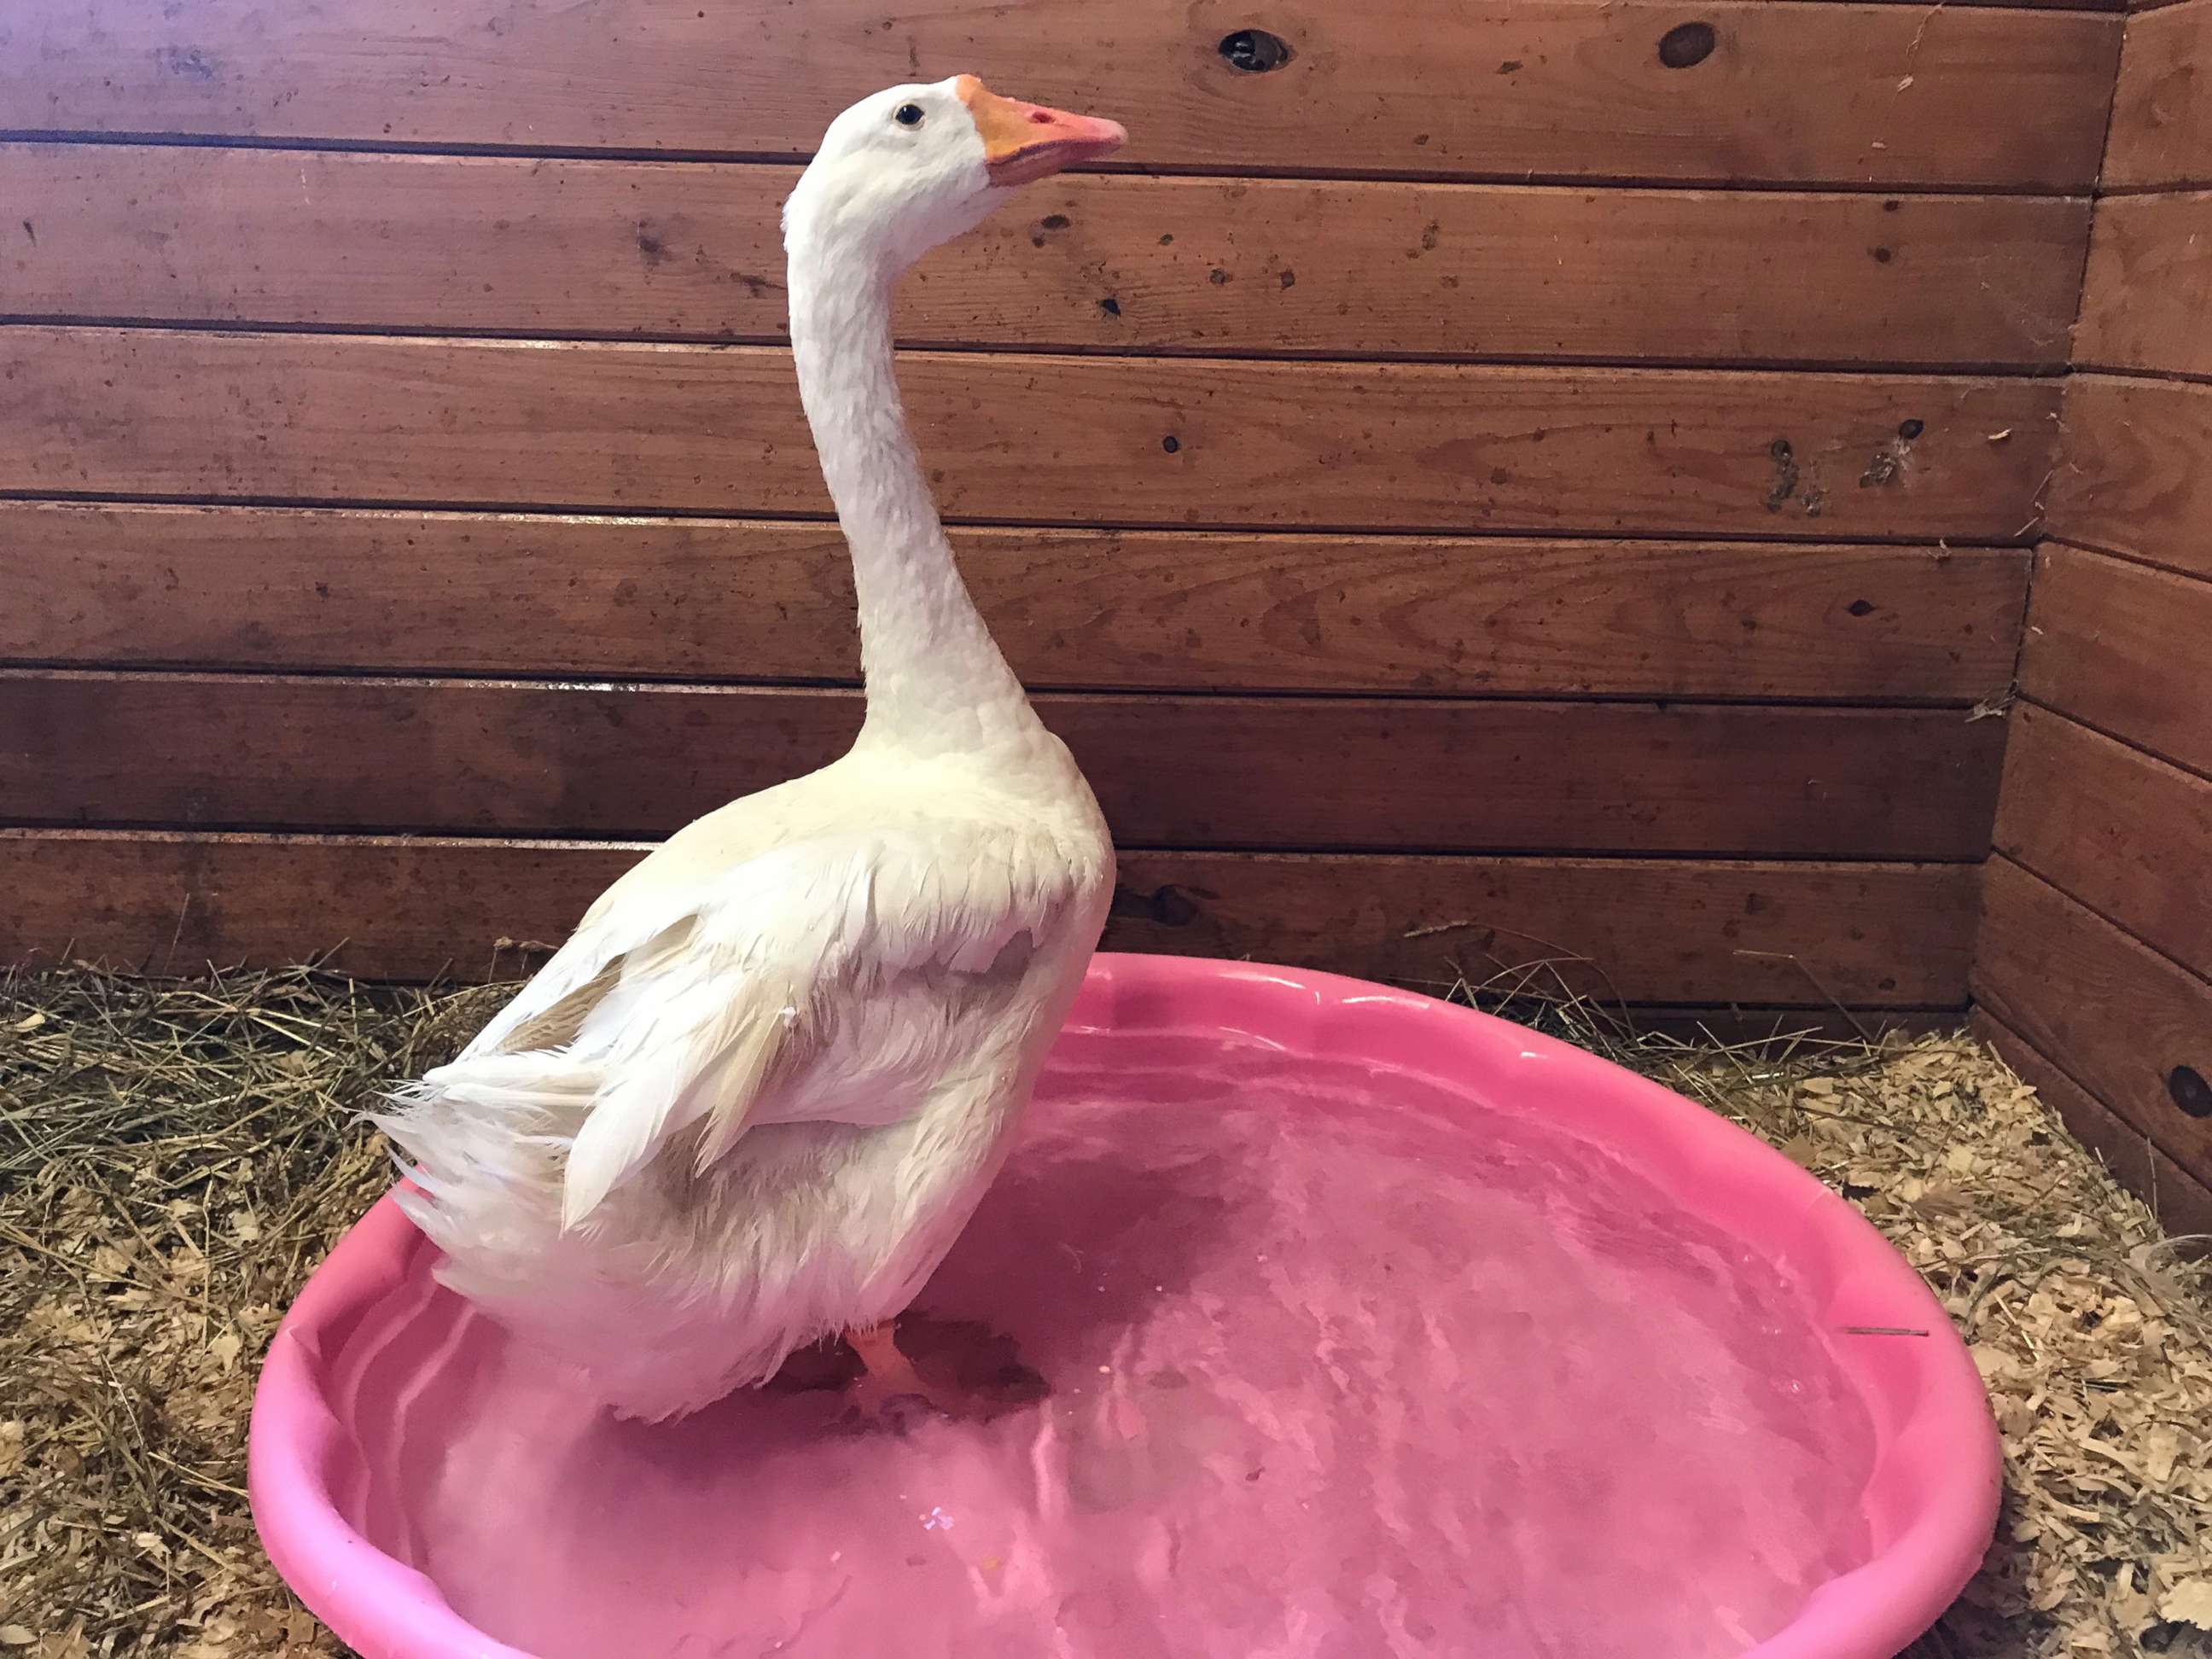 PHOTO: Hemingway, a goose, will soon be up for adoption at the Bucks County SPCA in Bucks County, Pa.